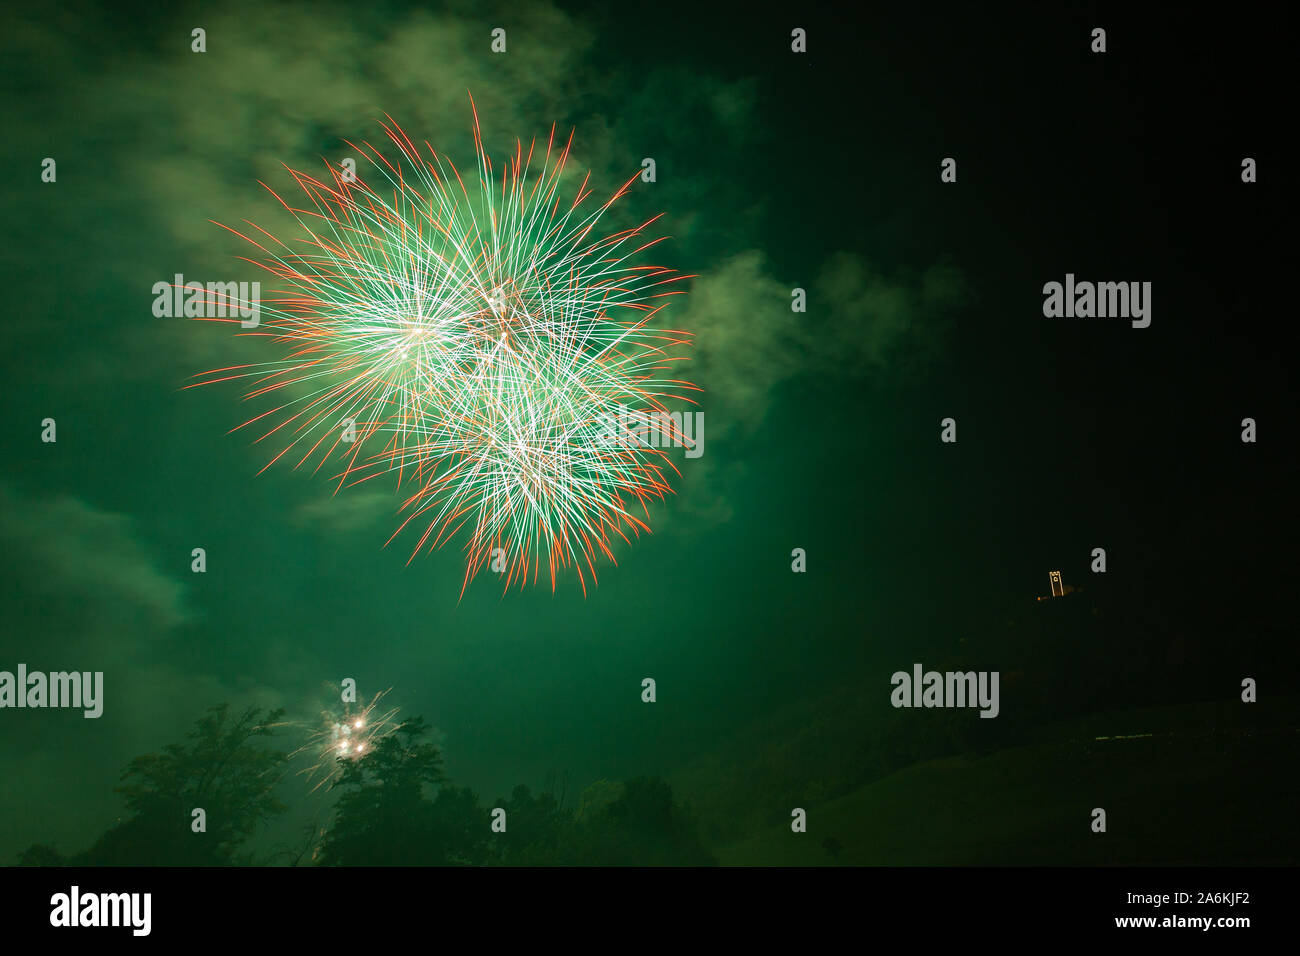 Bright green, white and red fireworks over trees silhouette Stock Photo